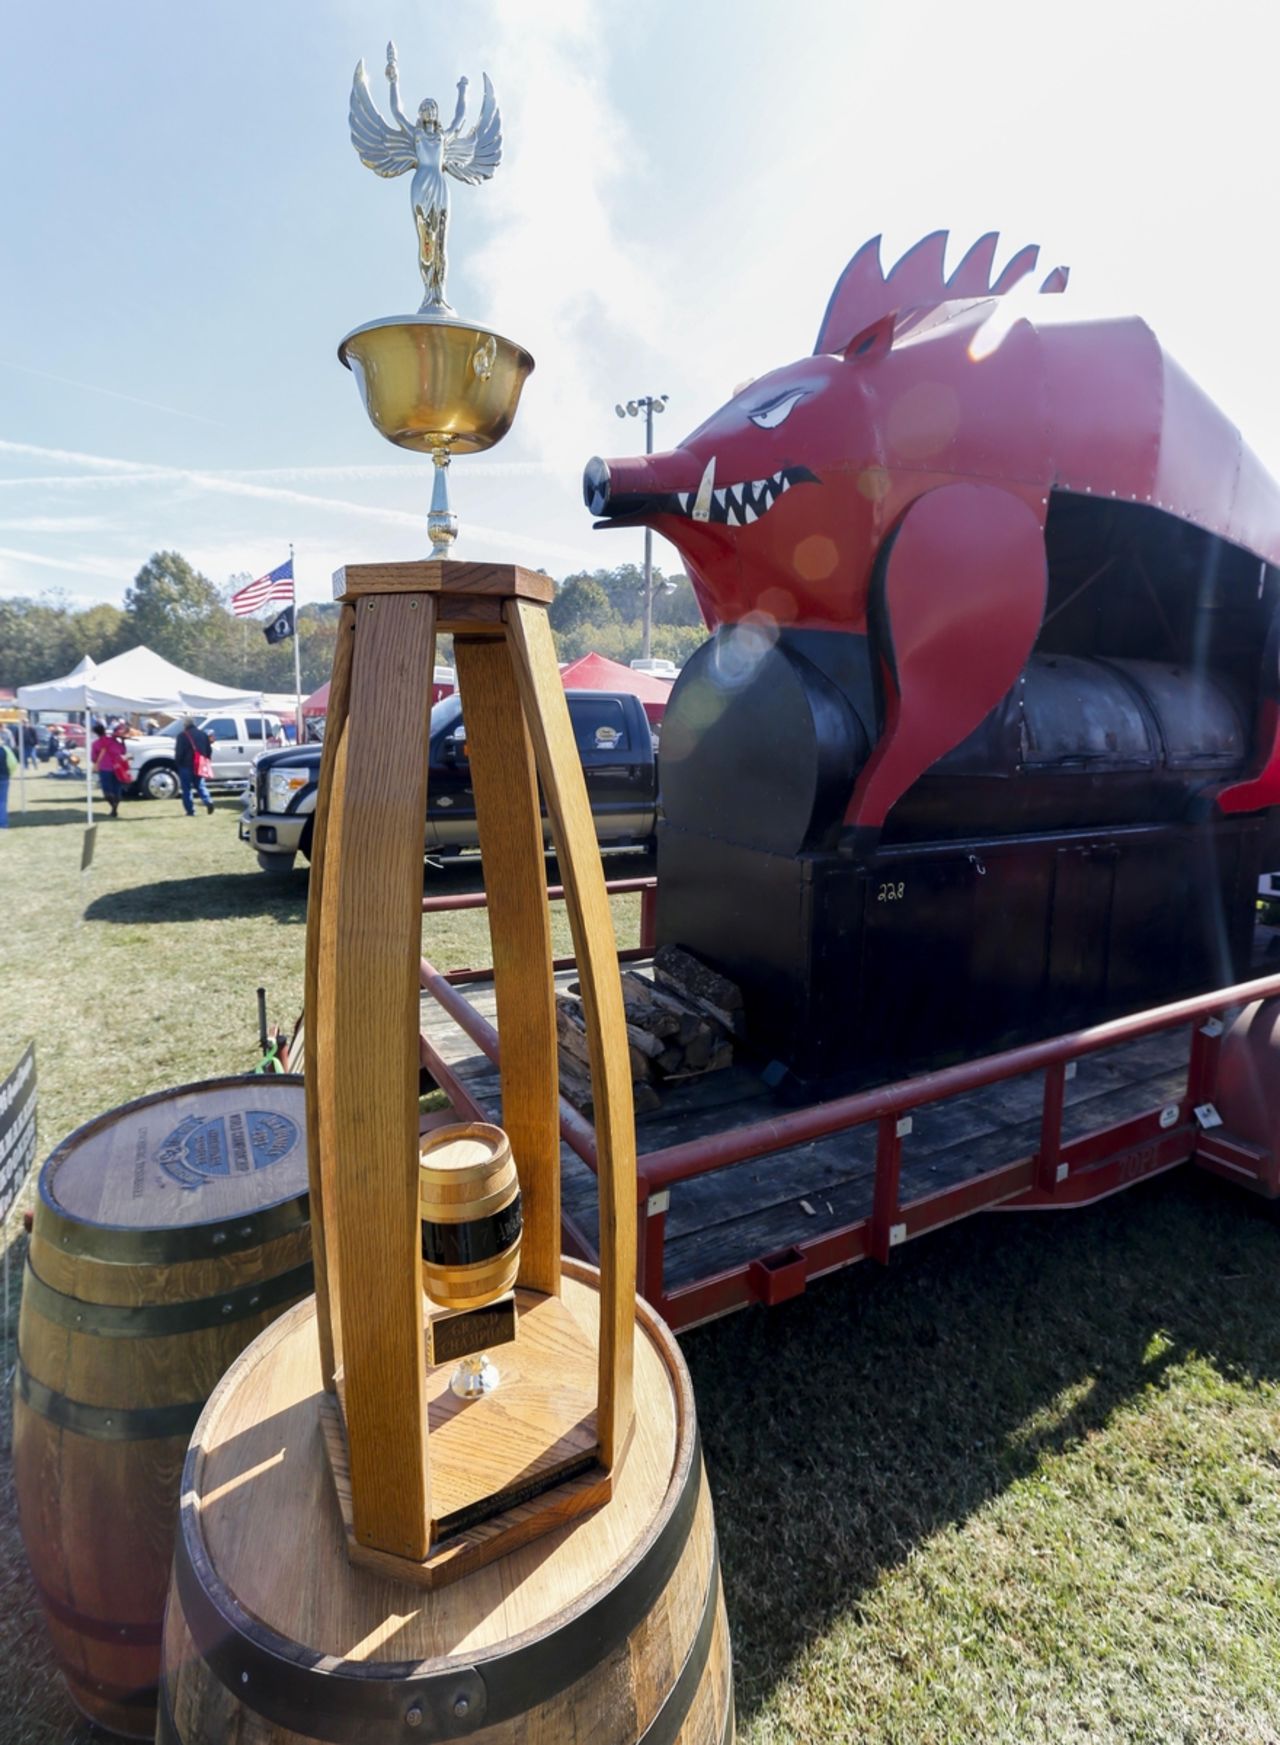 In 2013, a 'Winners Circle' of previous competitors took part in a separately judged contest. The Woo Pig Q-EE team's rig is a standout even among such lofty company.